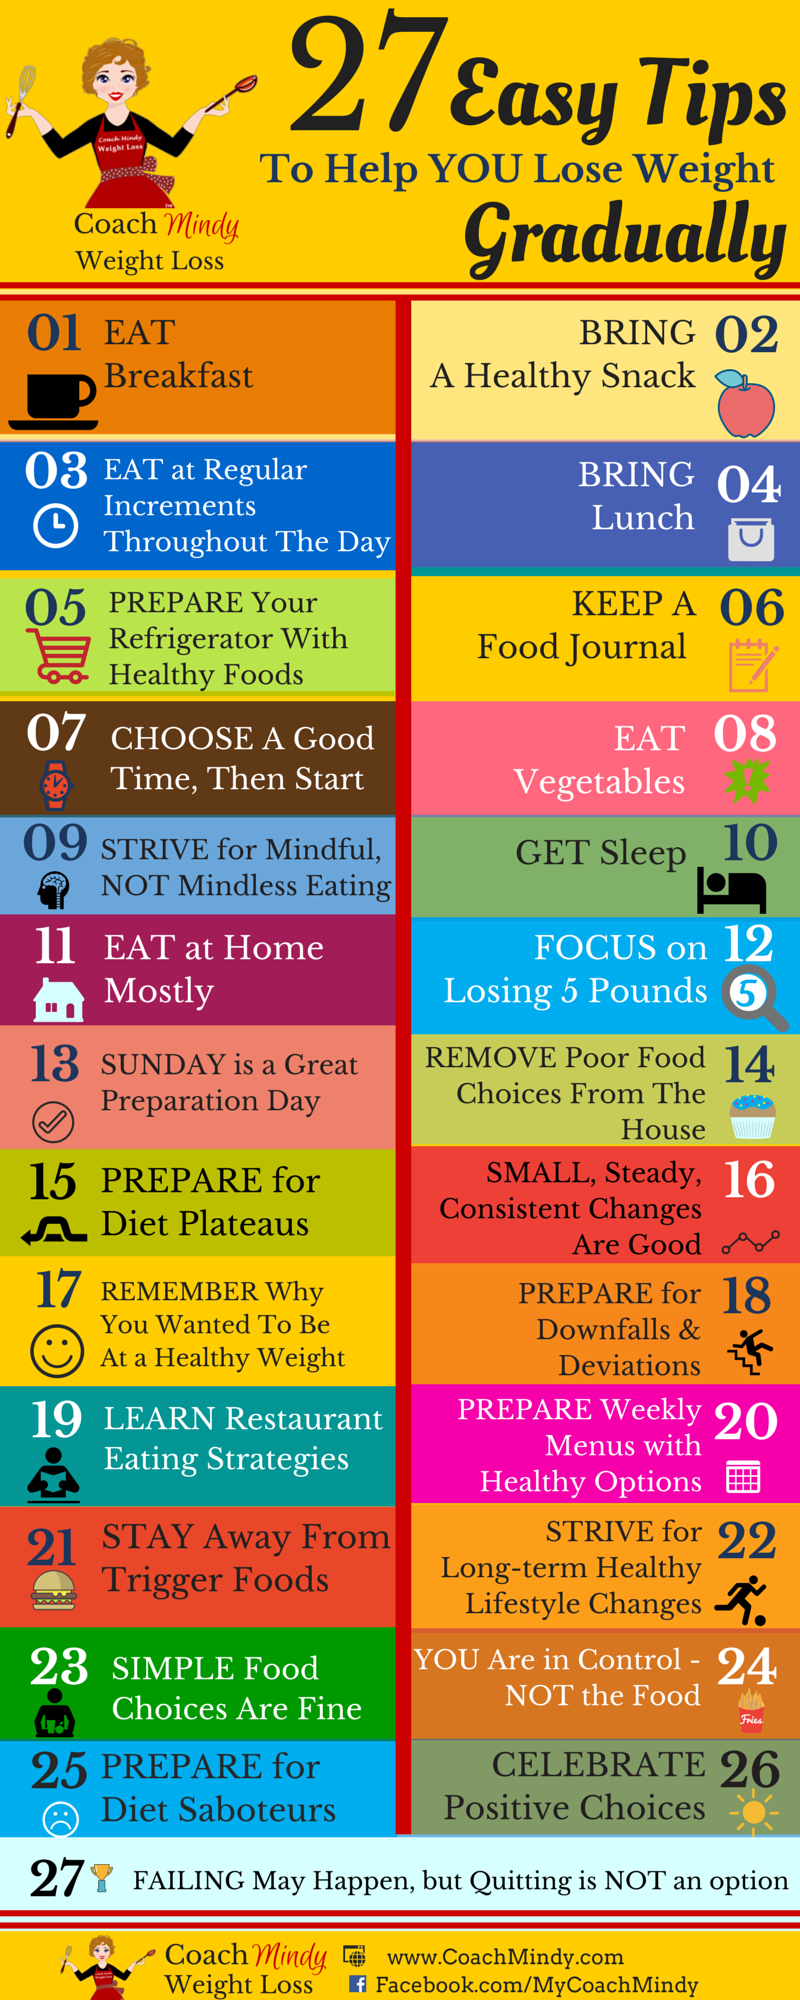 27 Easy Tips To Help You Lose Weight Gradually - Coach Mindy